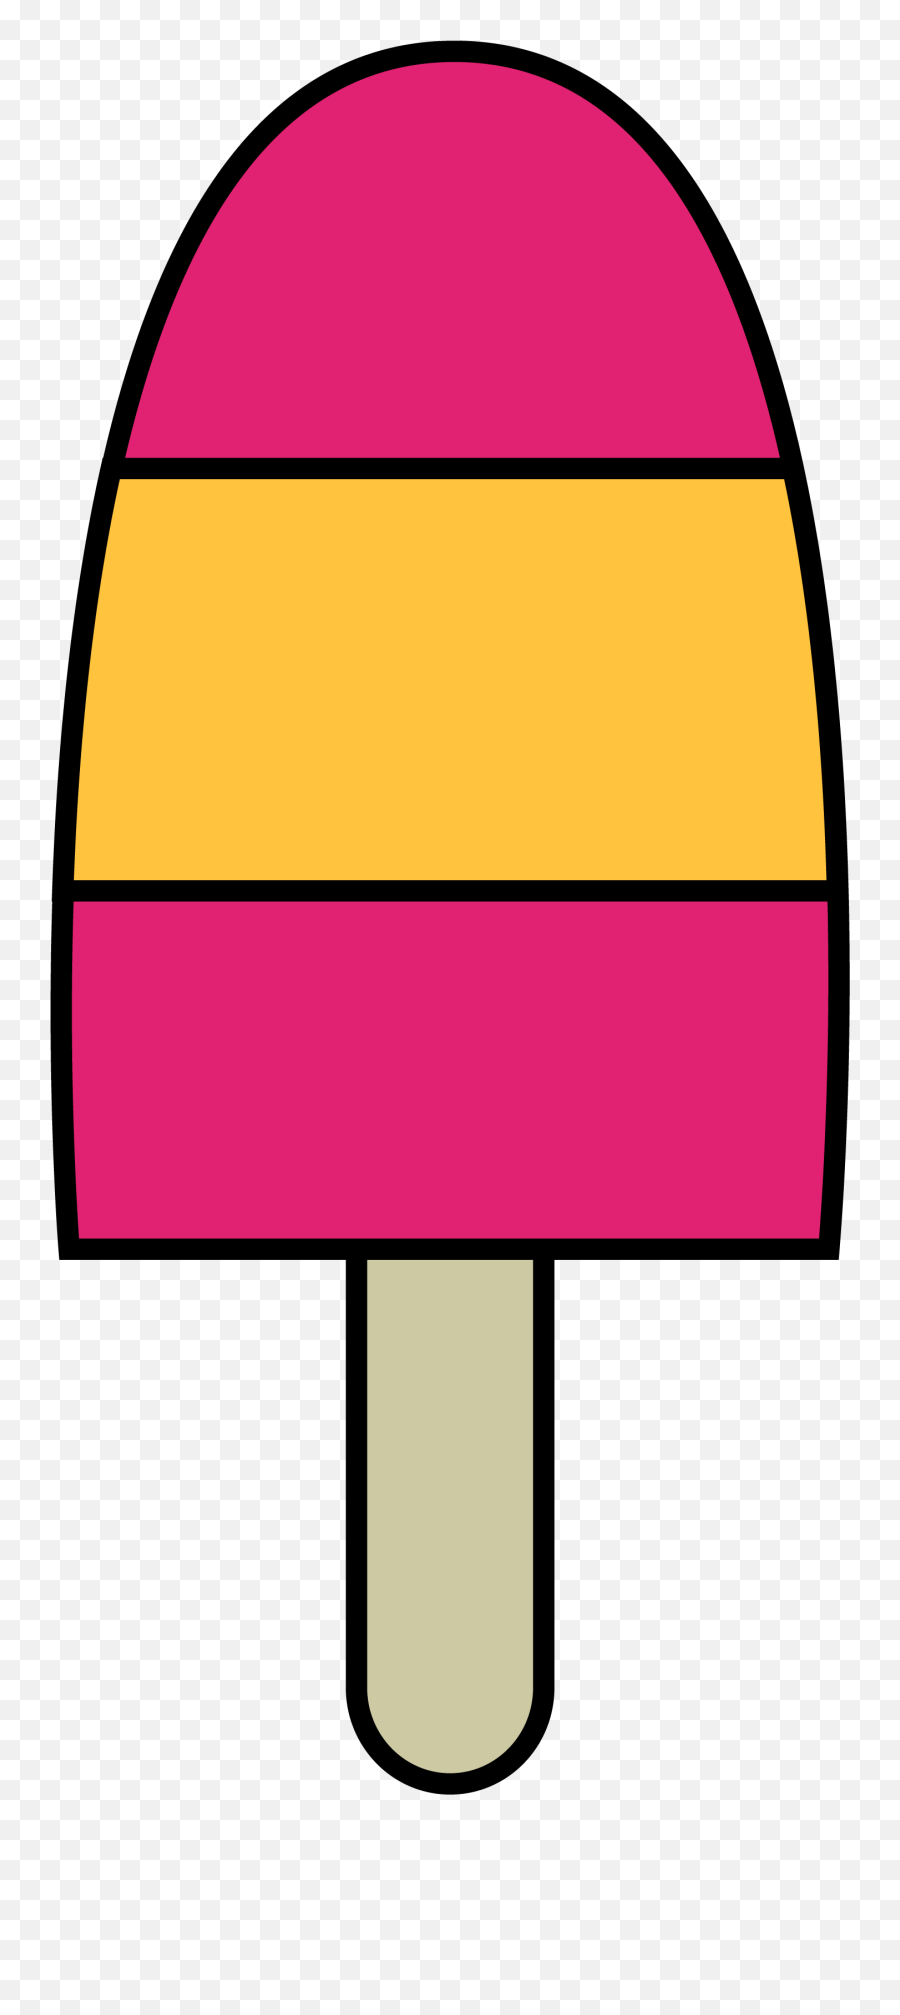 Roll And Color A Popsicle - Summer Math Game Activity Girly Emoji,Volcano Emotions Activity